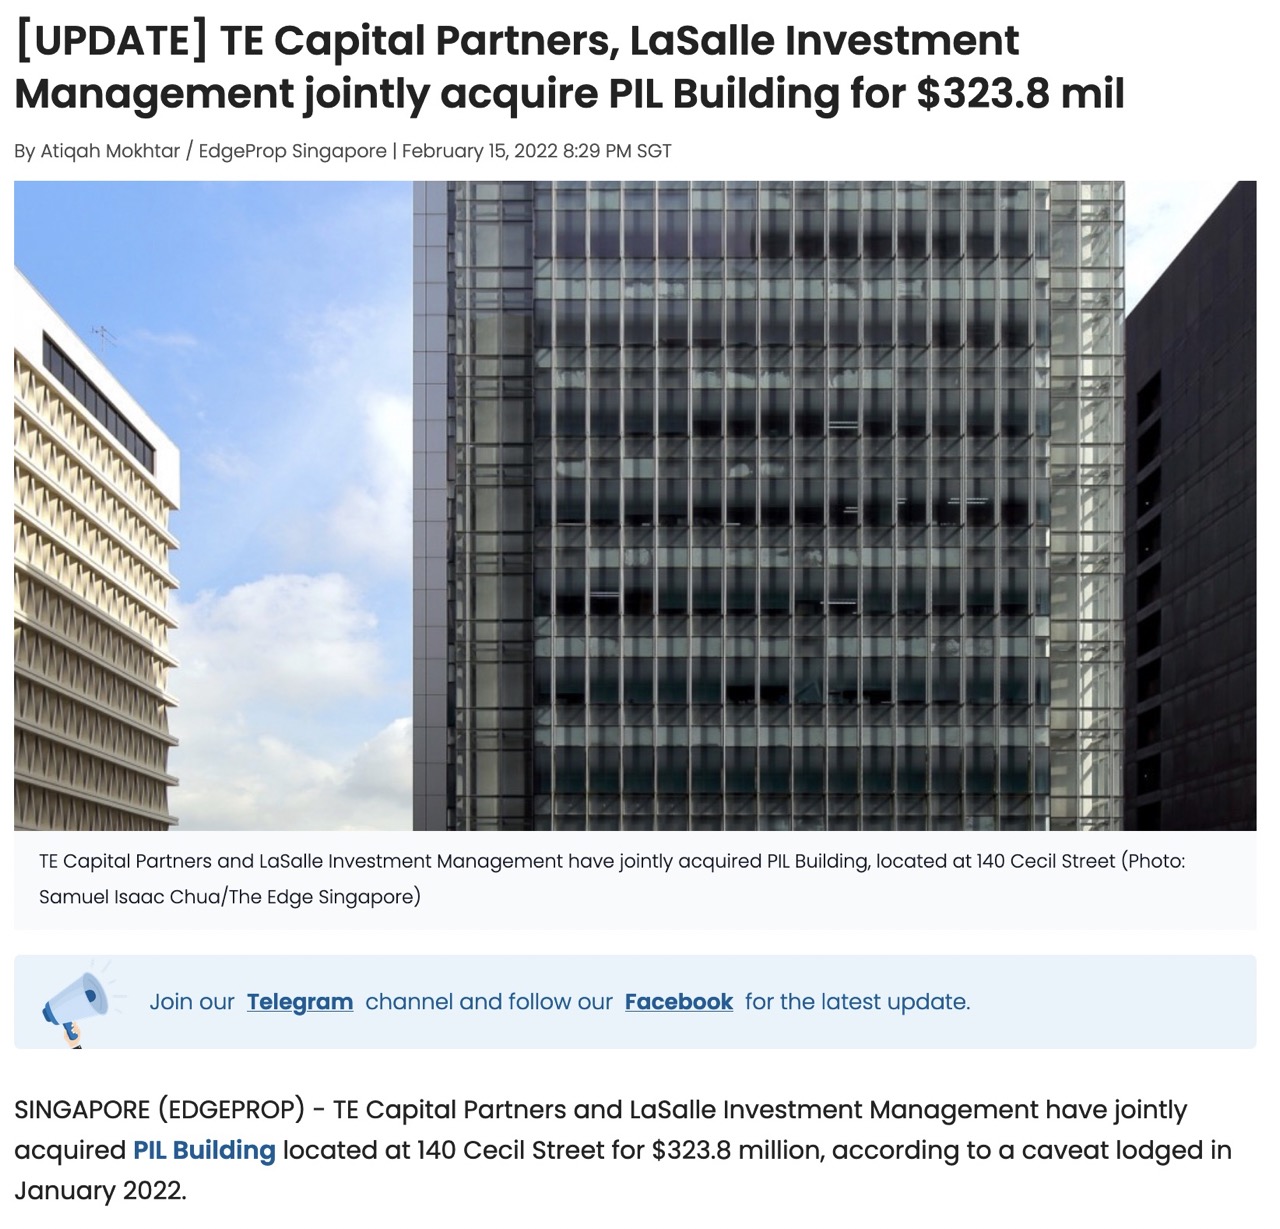 te-capital-partners-lasalle-investment-management-jointly-acquire-pil-building-for-323-8-mil-1